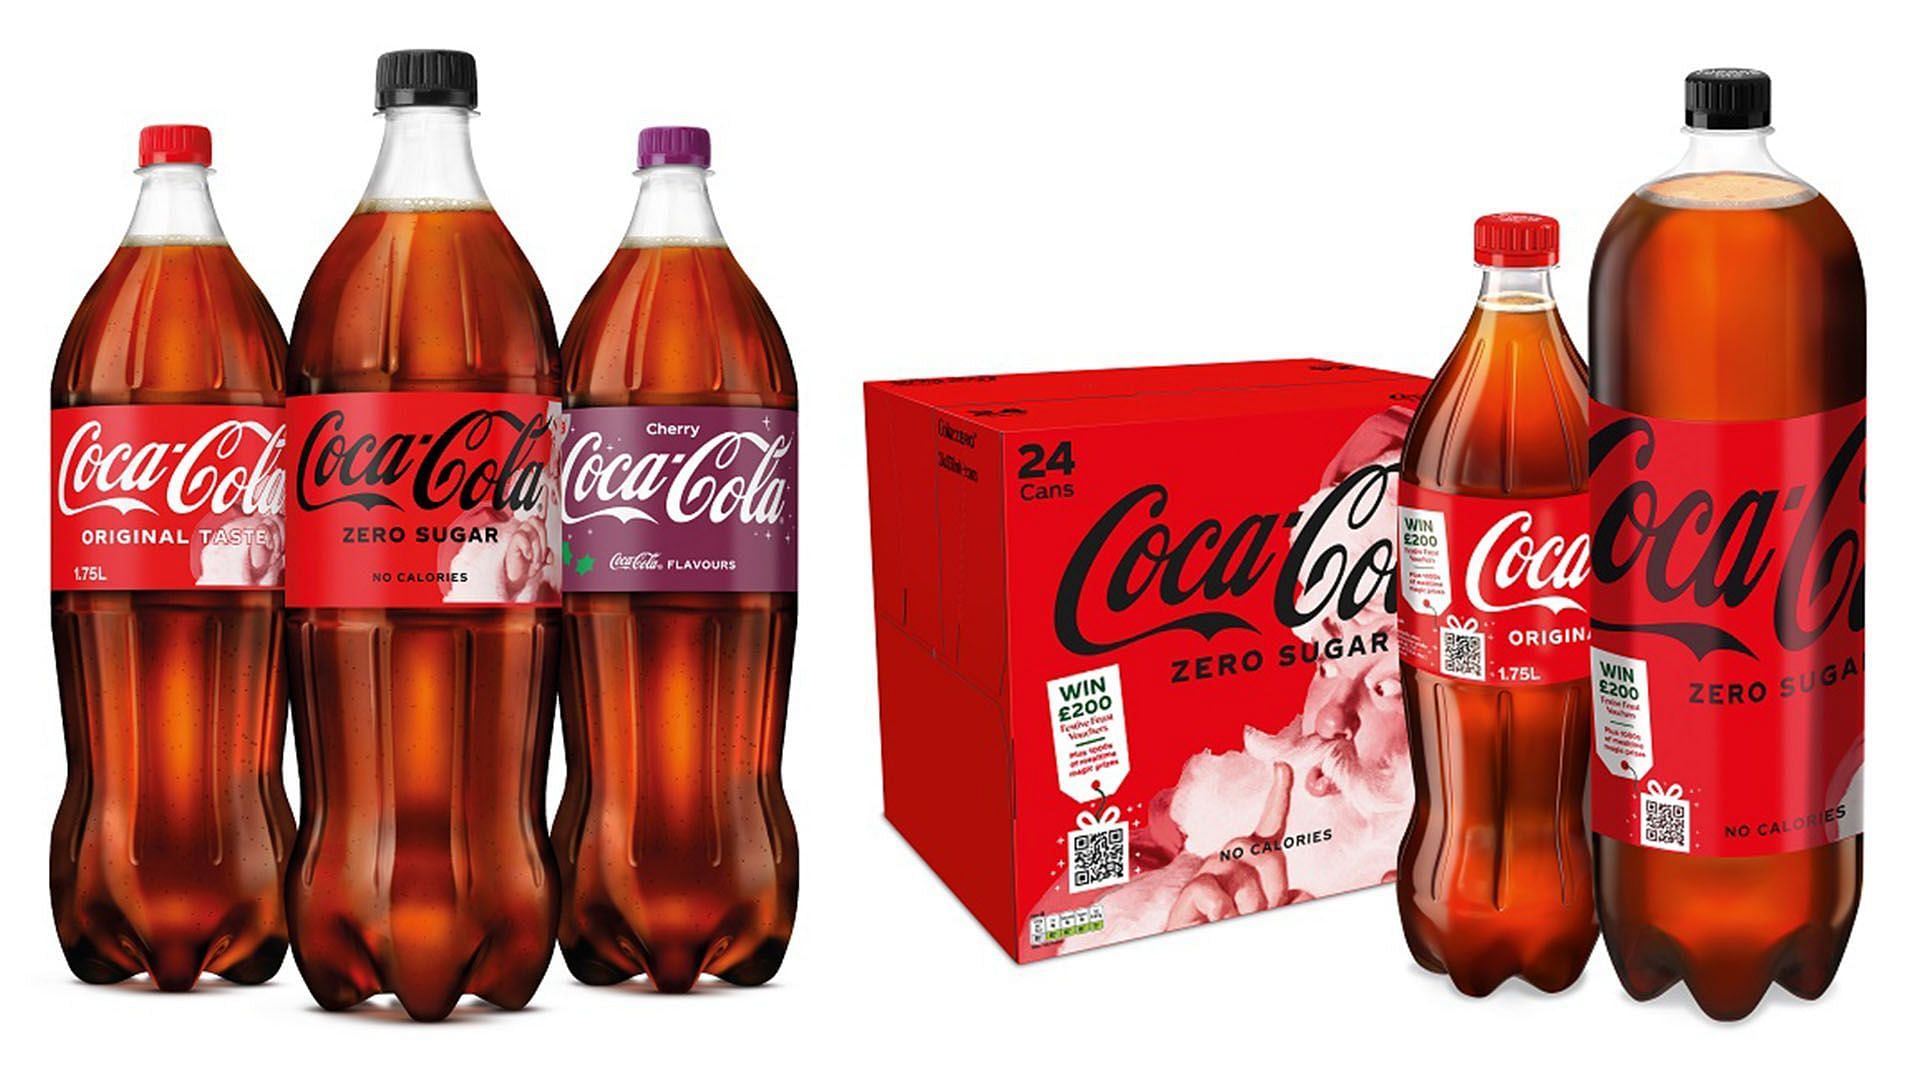 CocaCola Christmas Countdown Deal, release date, price, and flavor